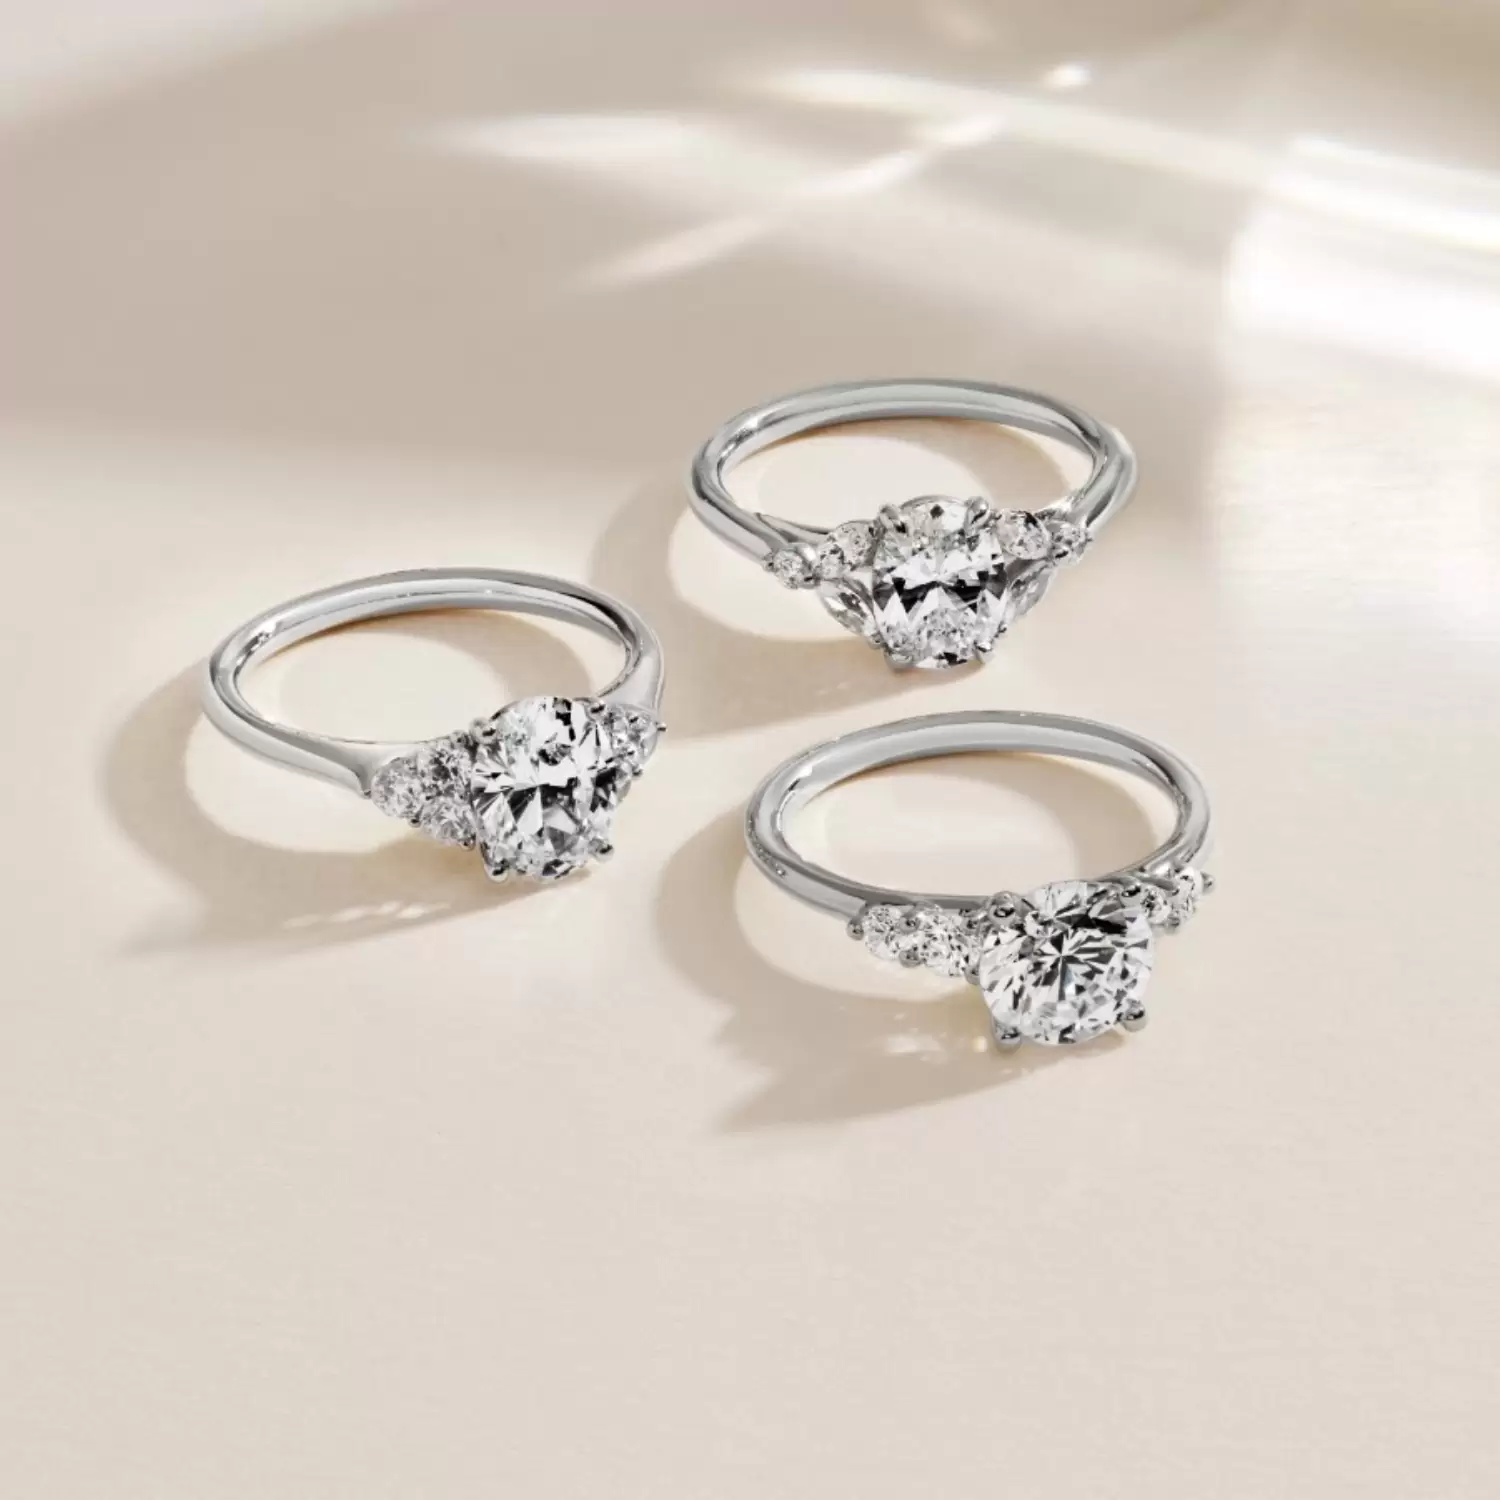 Sylvie Jewelry Engagement rings in Noblesville, Indiana